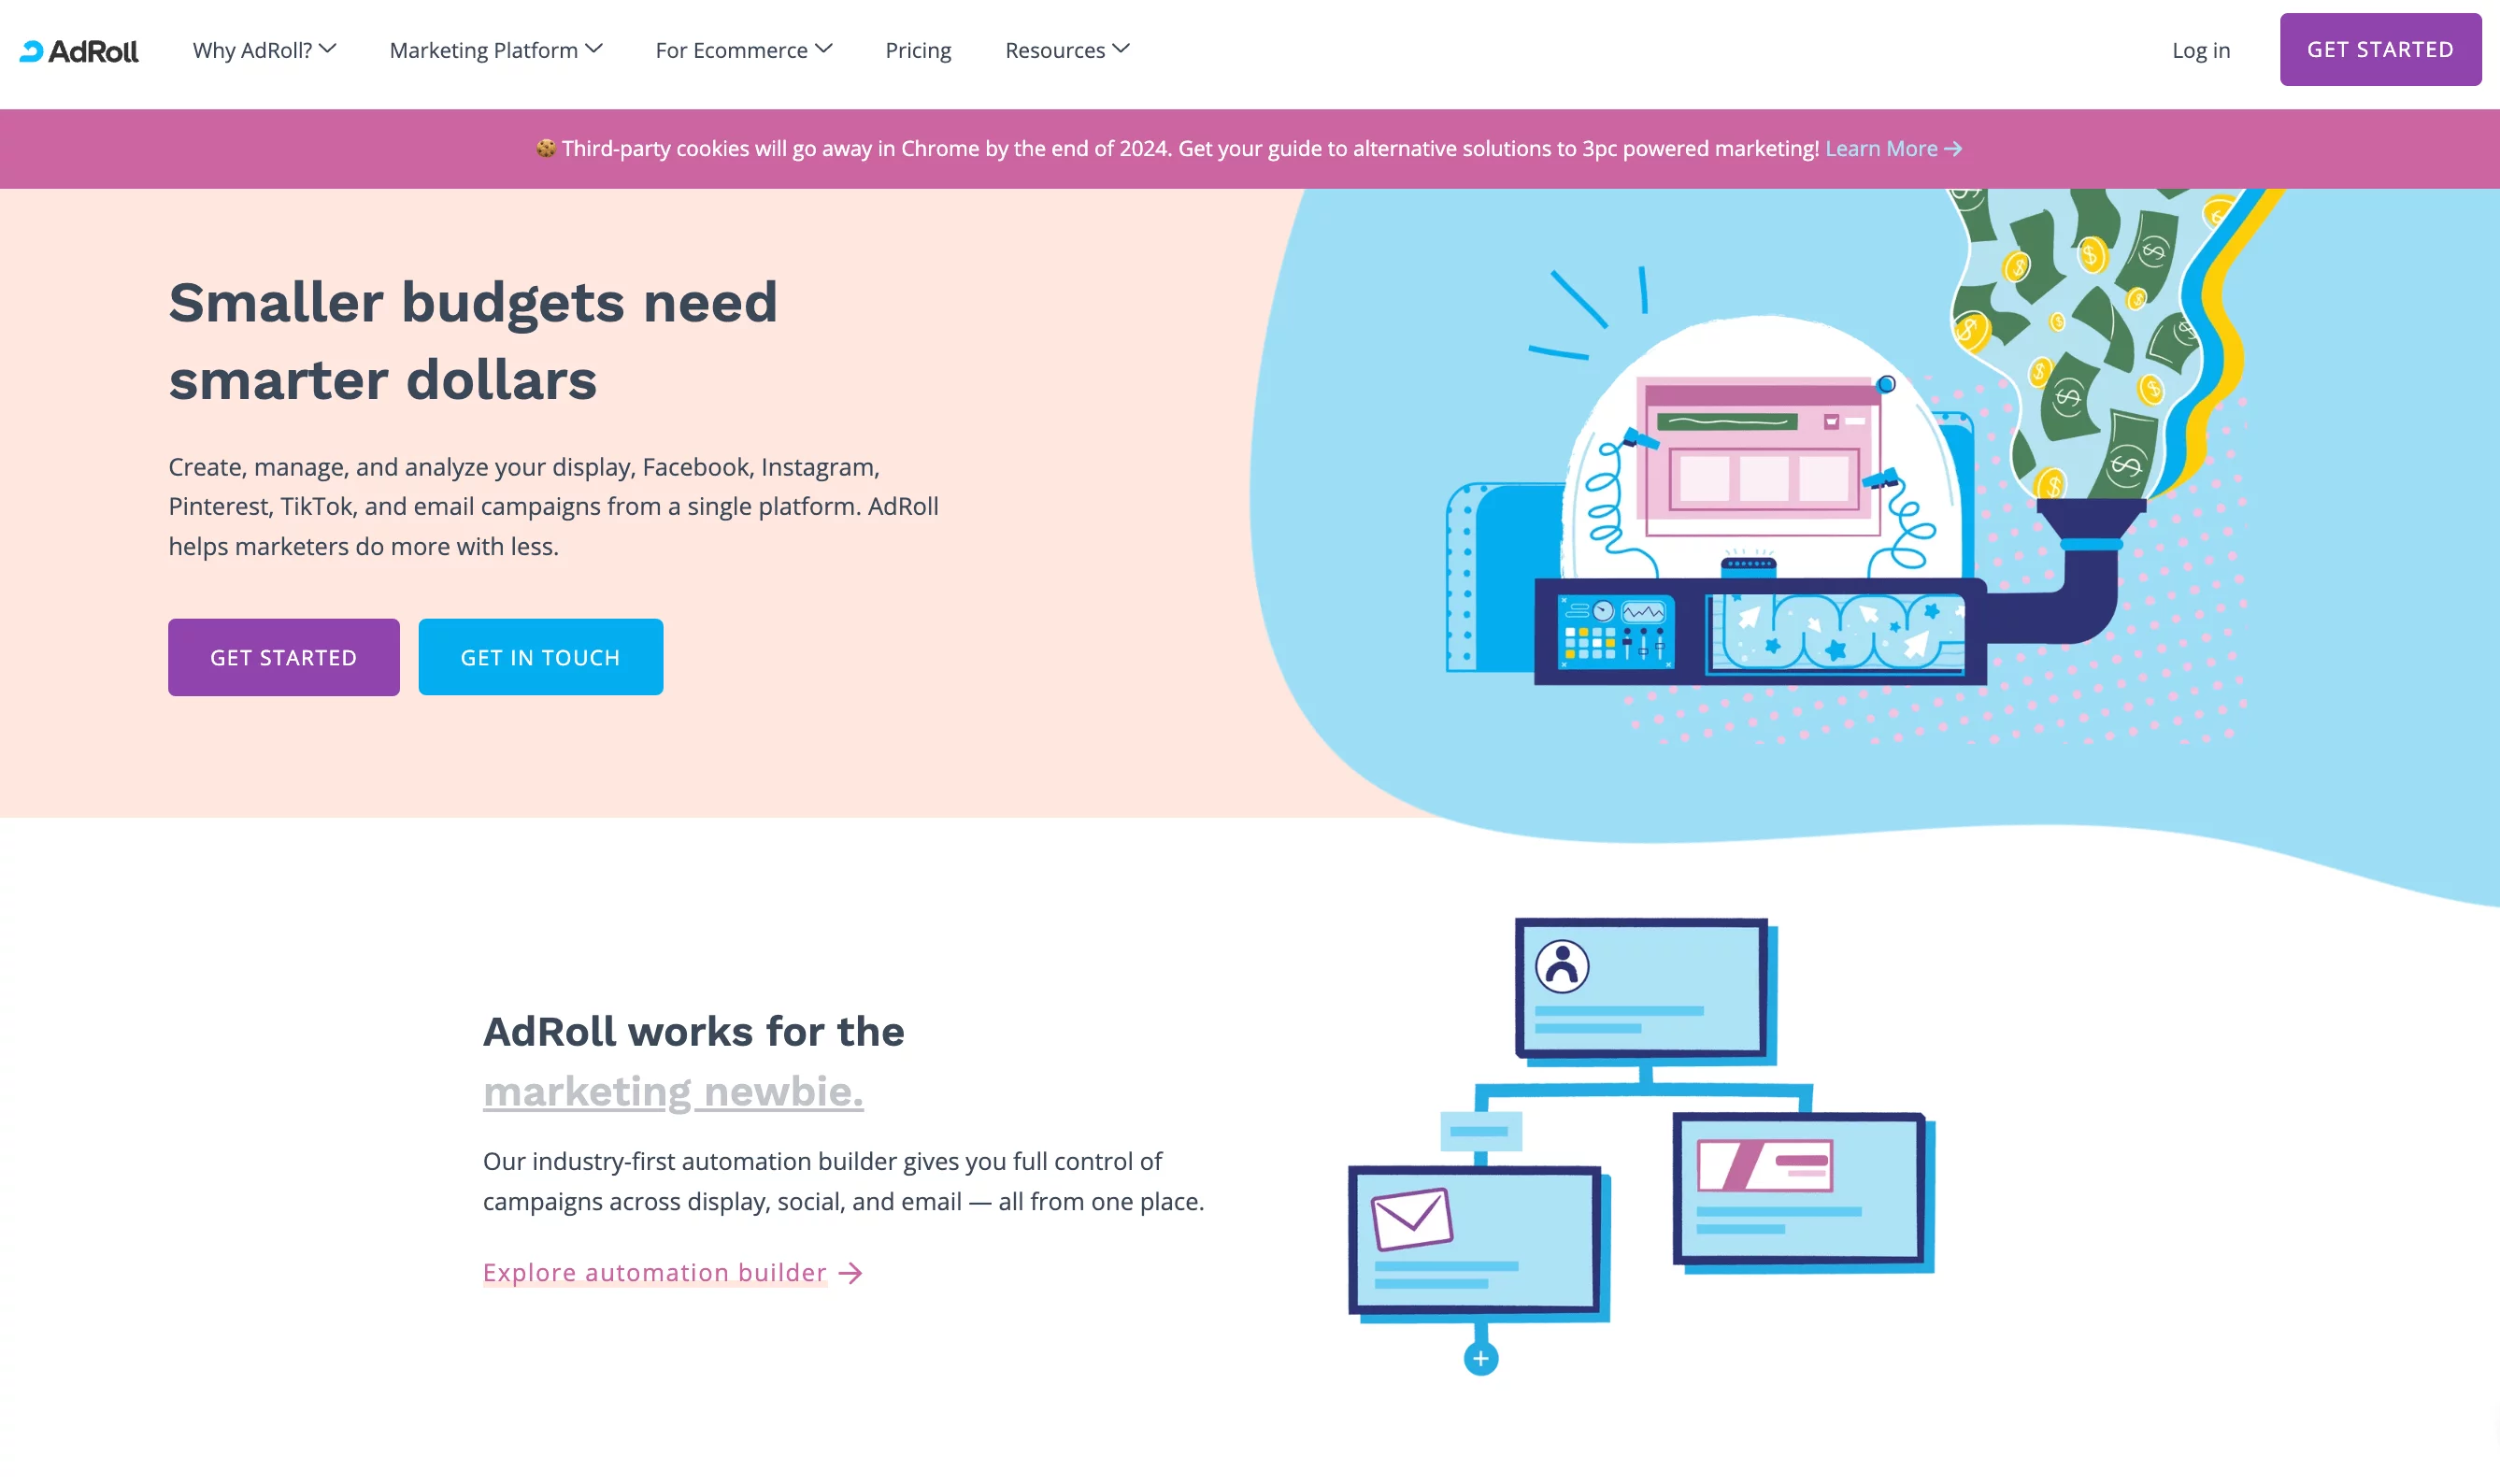 AdRoll homepage highlighting advertising and marketing solutions for businesses